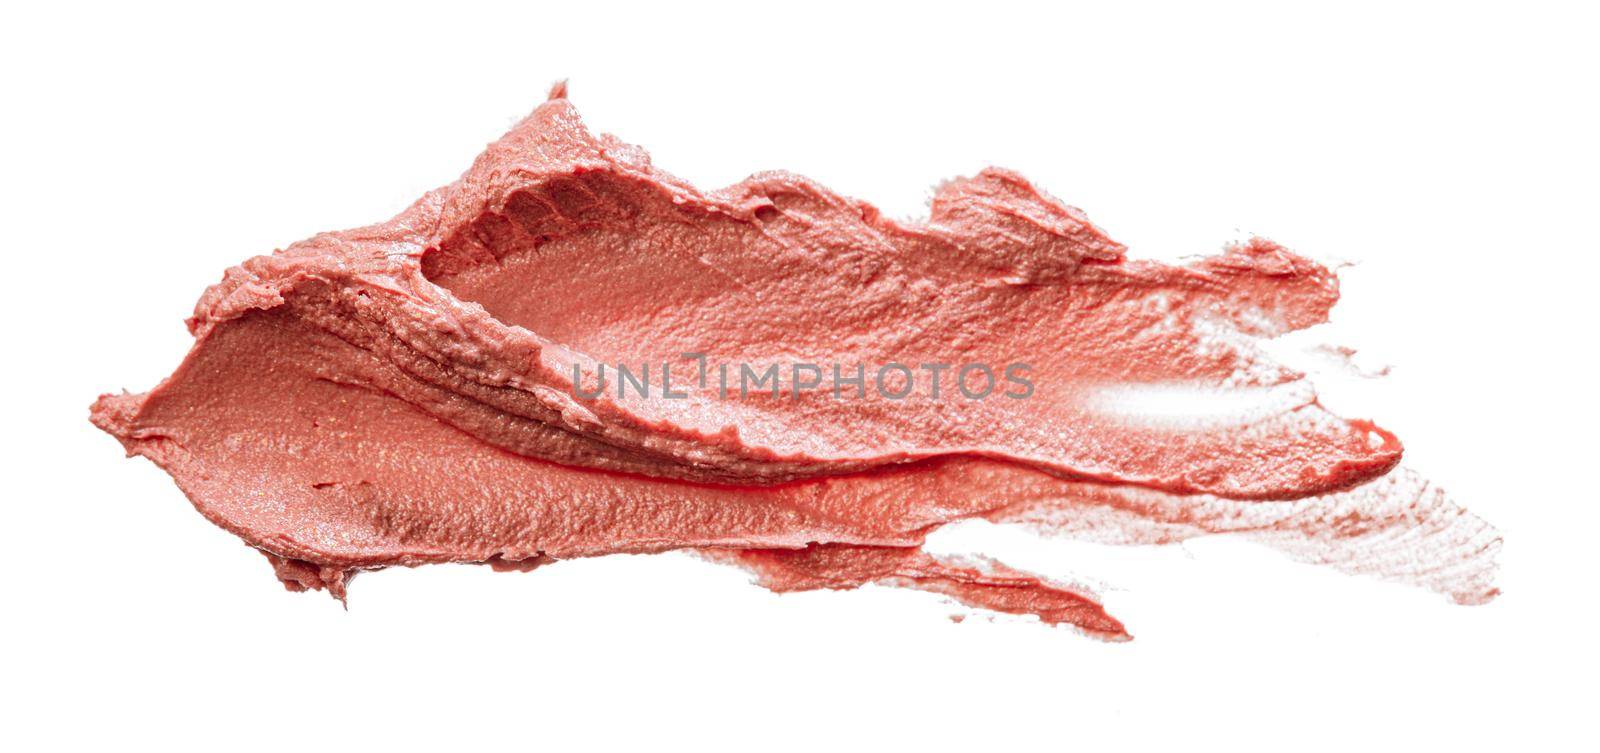 Stains of a pink lipstick isolated on white background, close up.